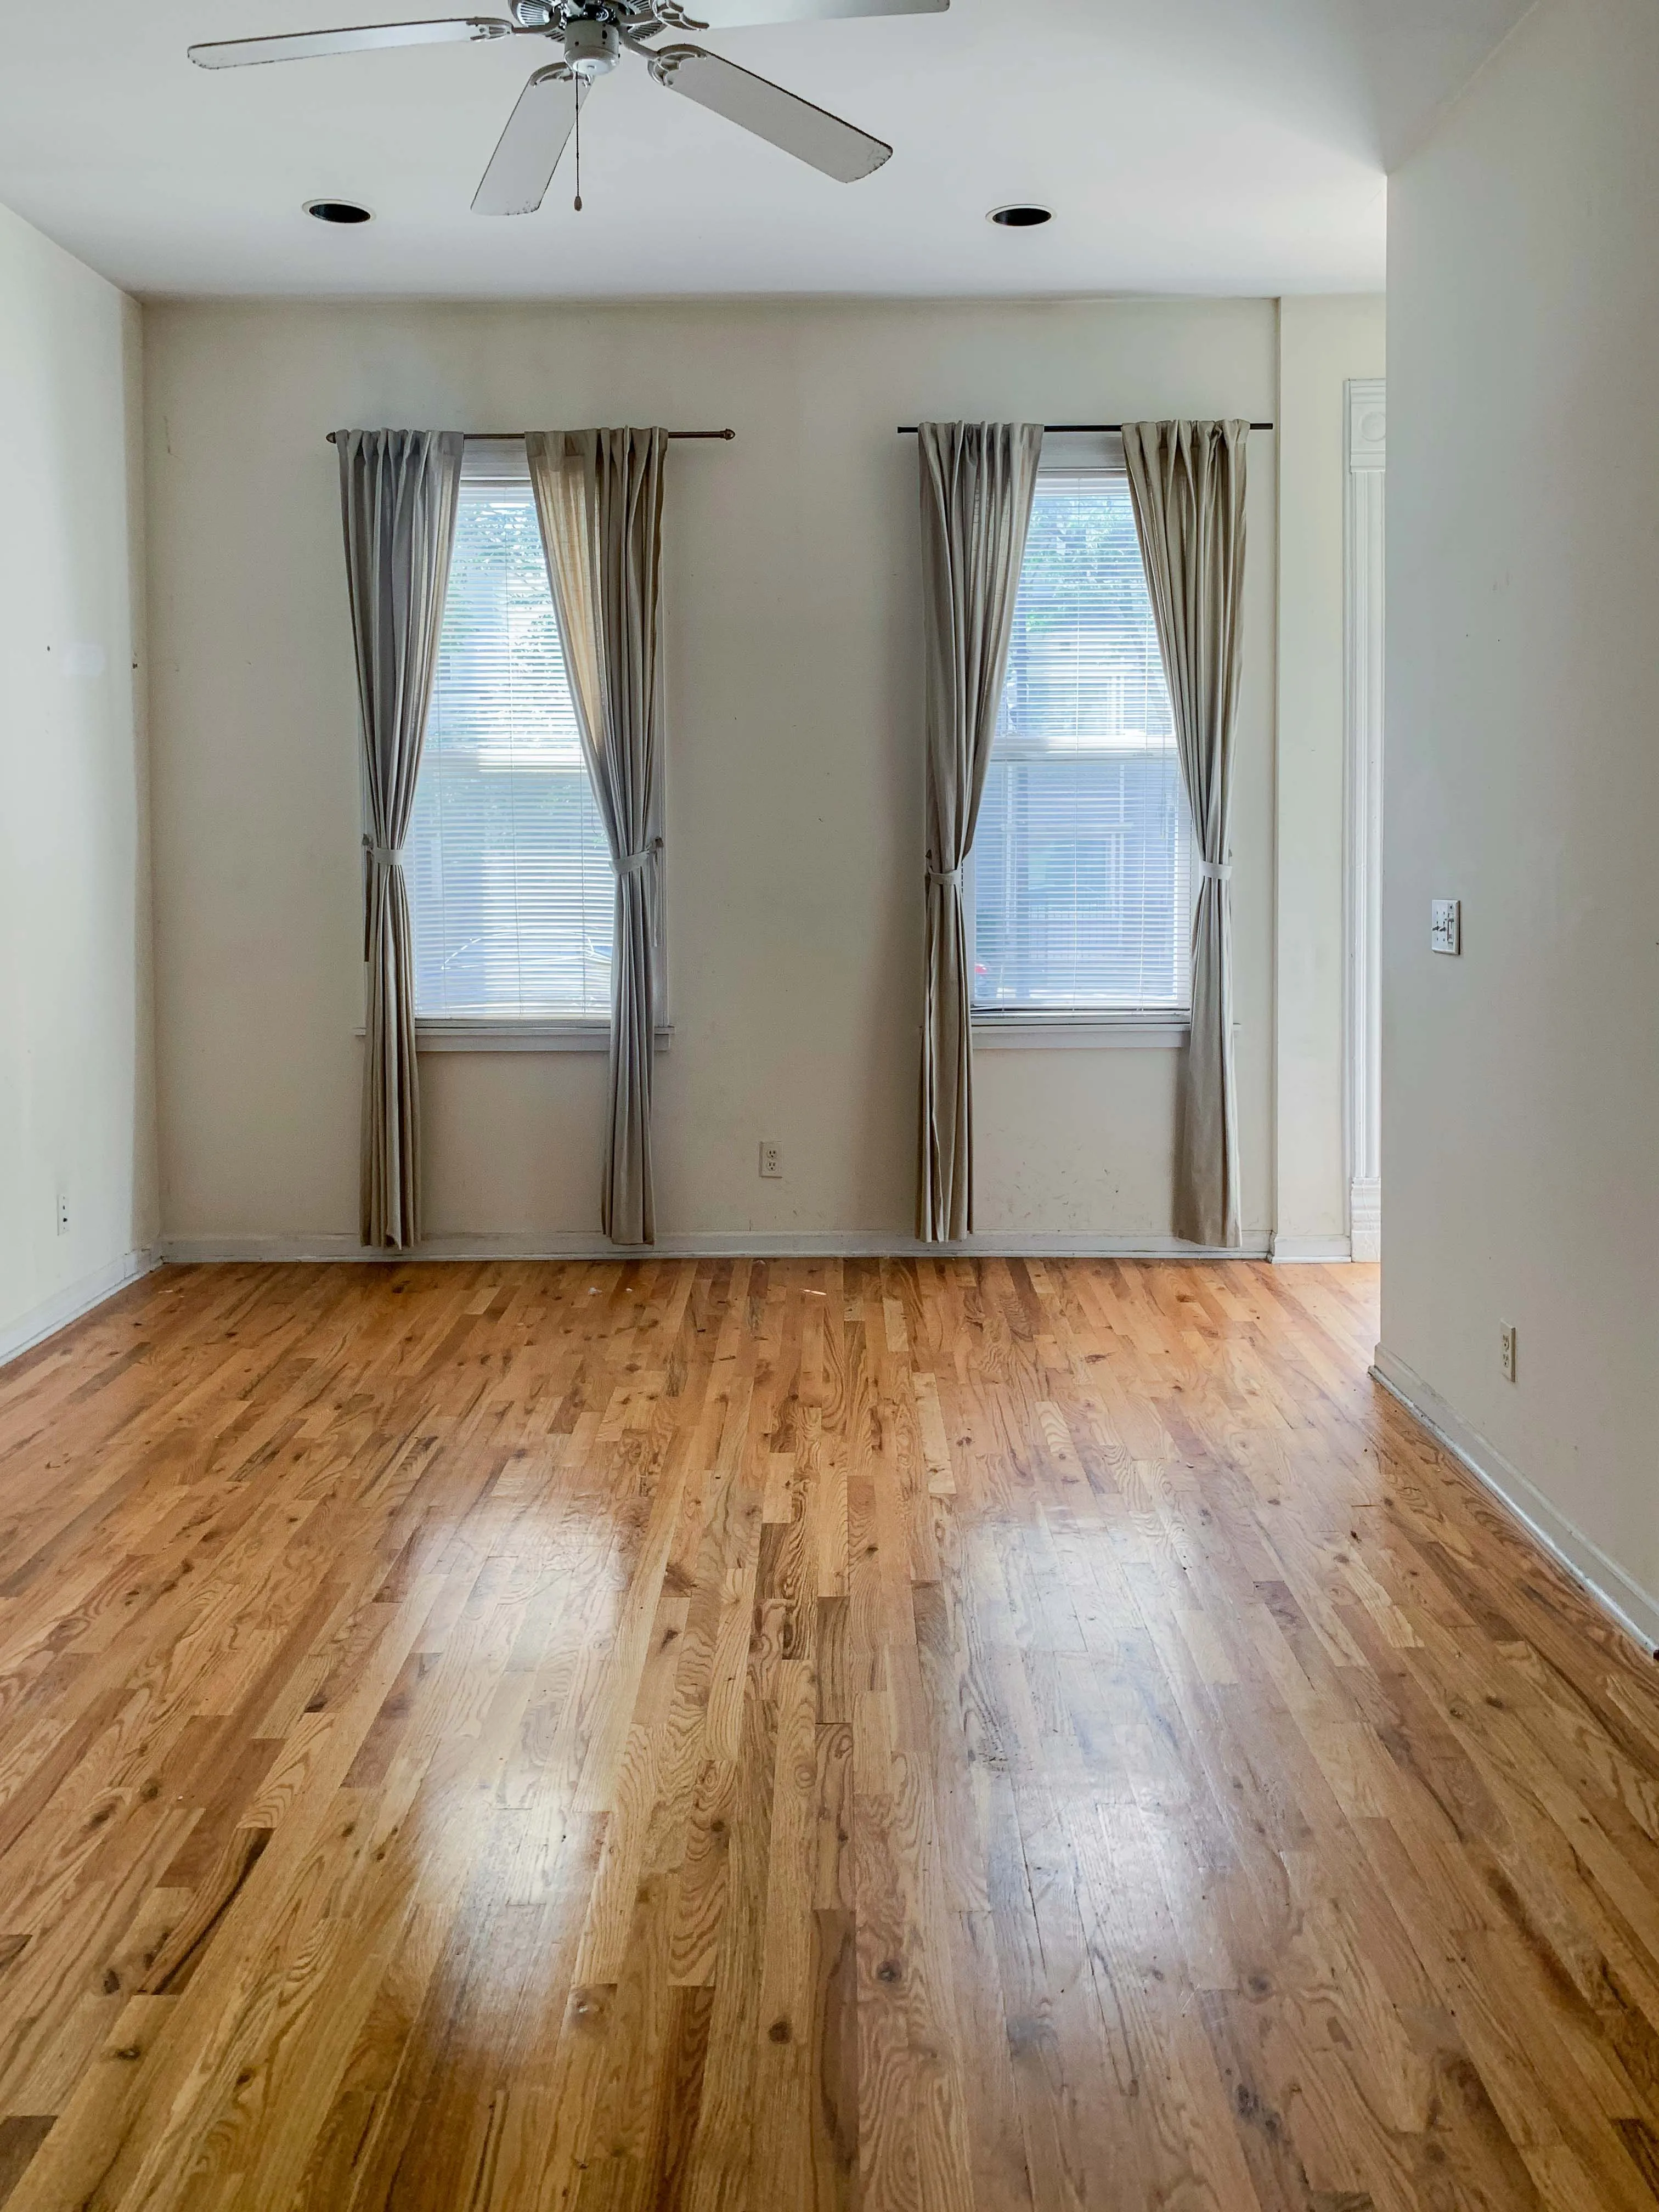 3309 N Southport Ave 60657 60657-unit#1F-Chicago-IL